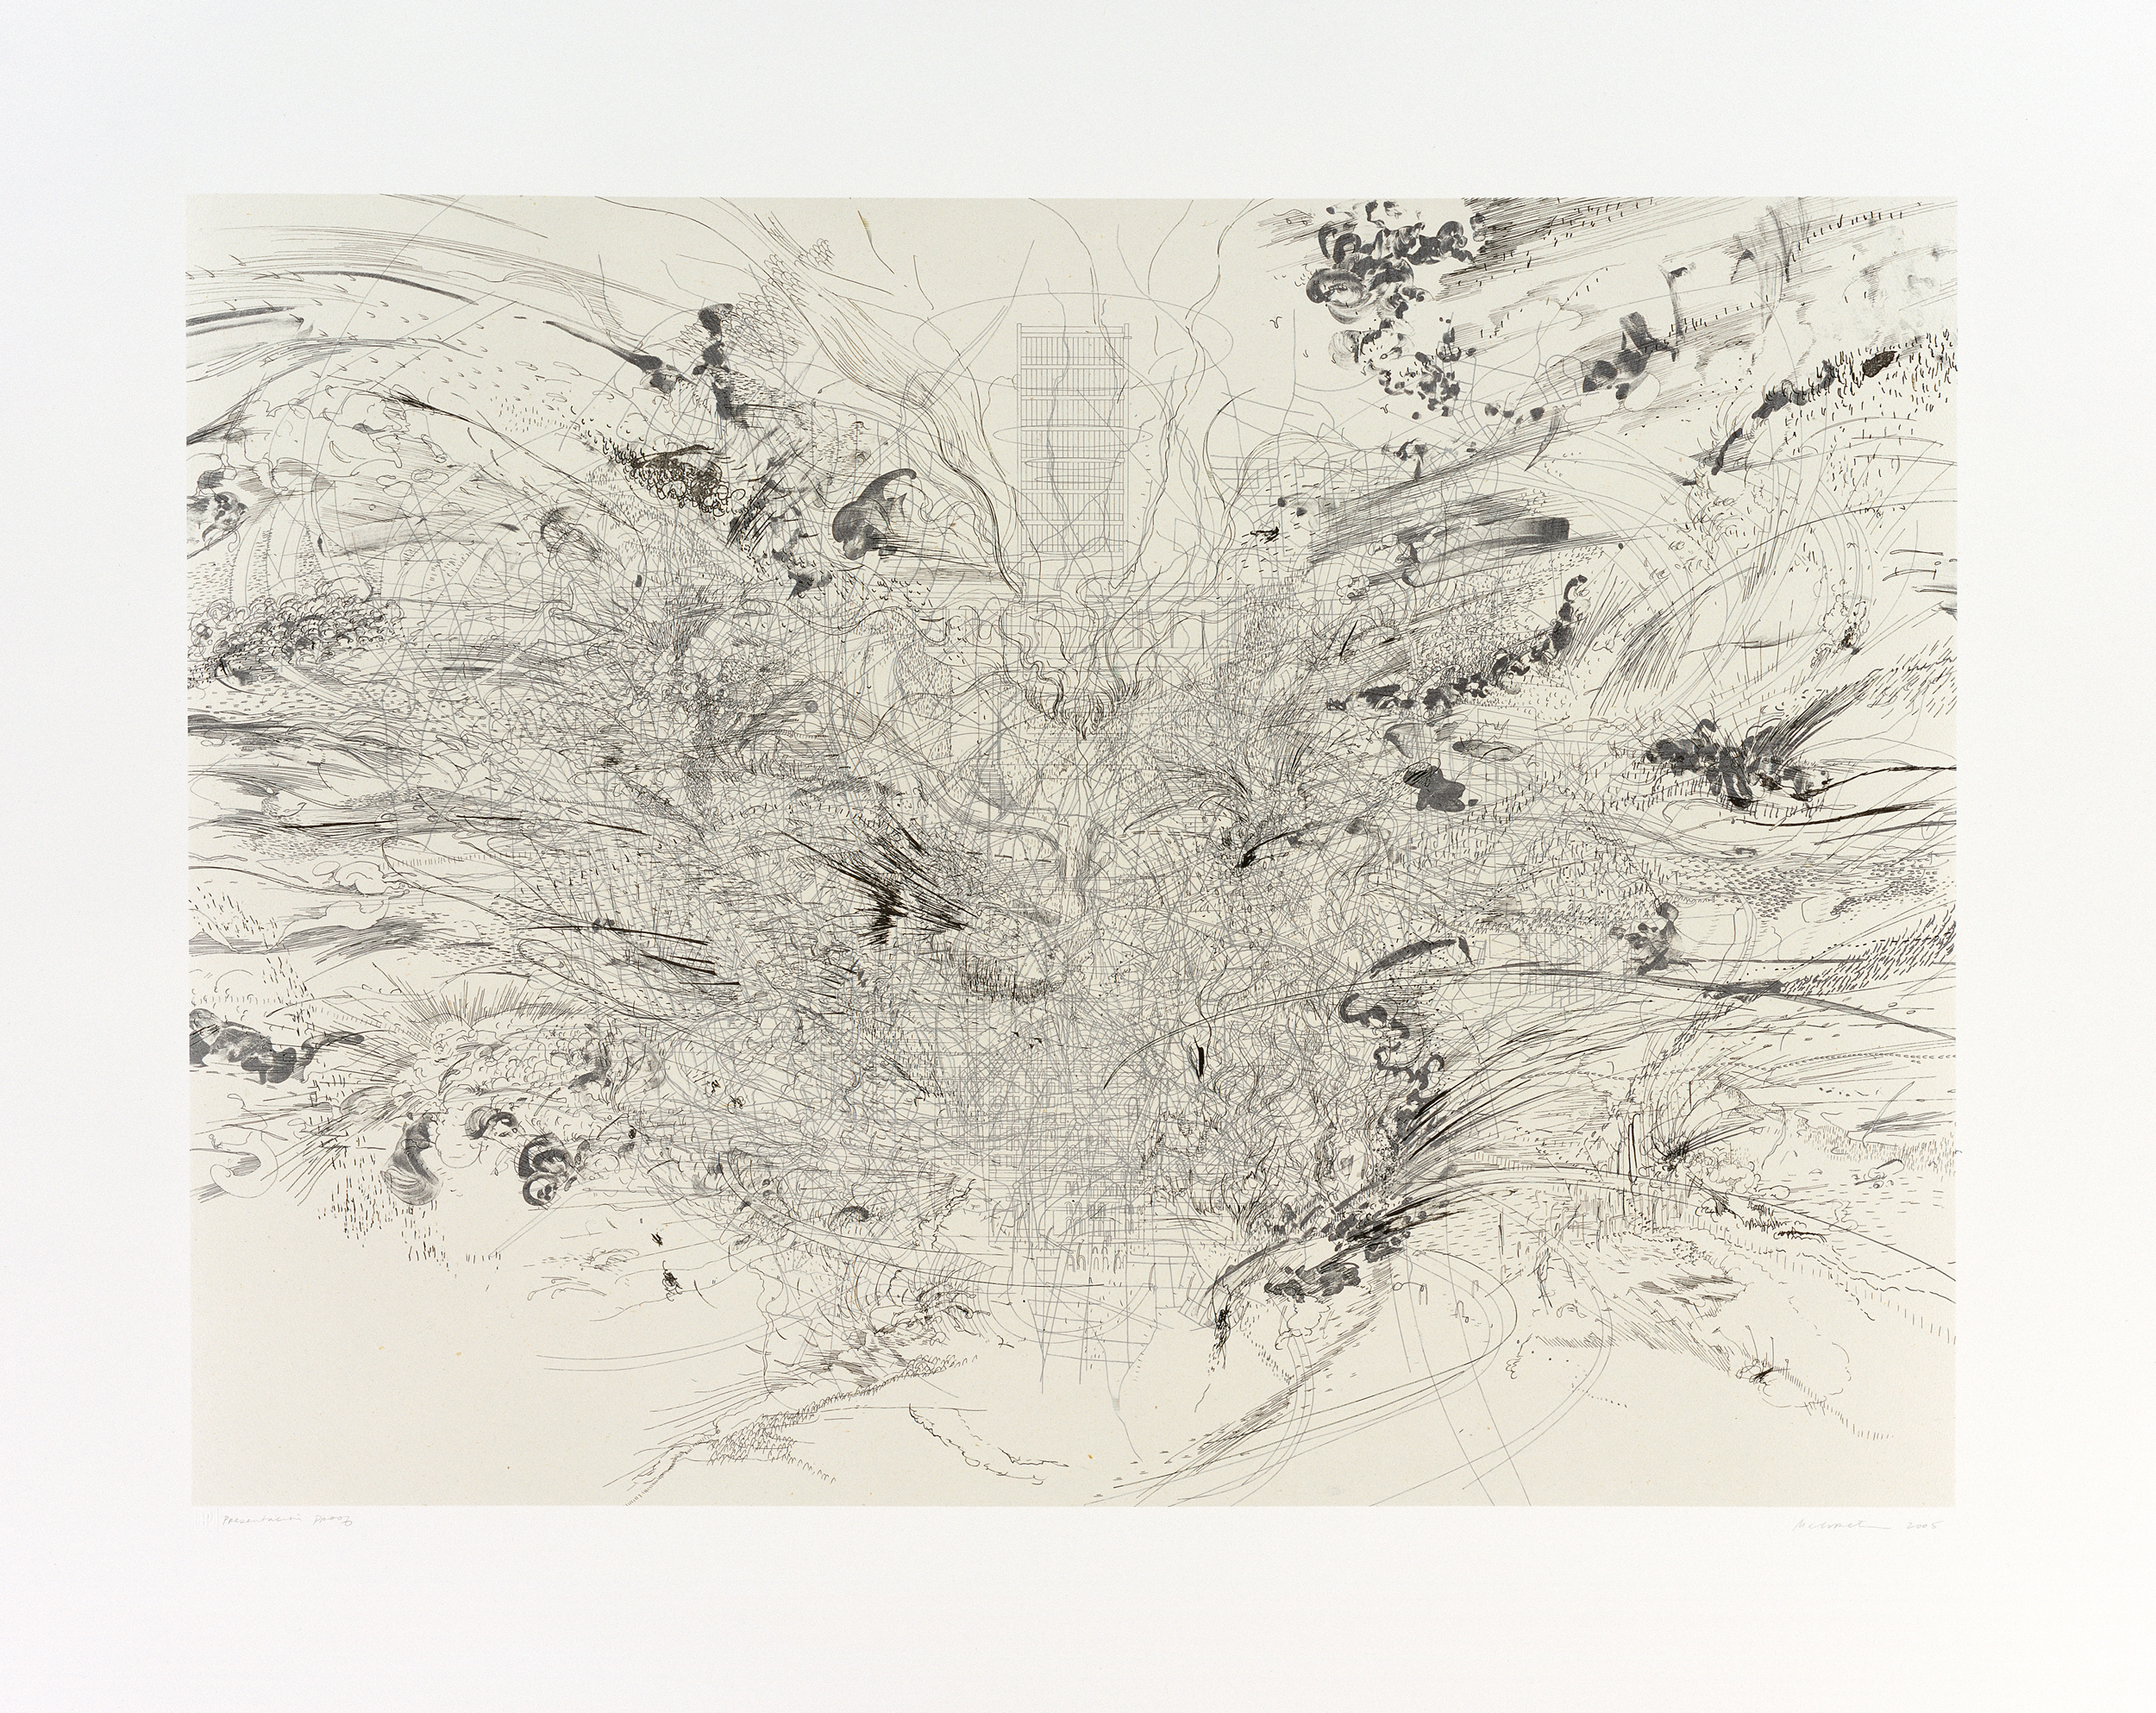    Entropia: Construction   by Julie Mehretu 2005  Edition of 30 | Lithograph with Gampi chine collé on Somerset Satin | image: 29 1/2" x 39 1/2" | paper: 40" x 49 1/2"  